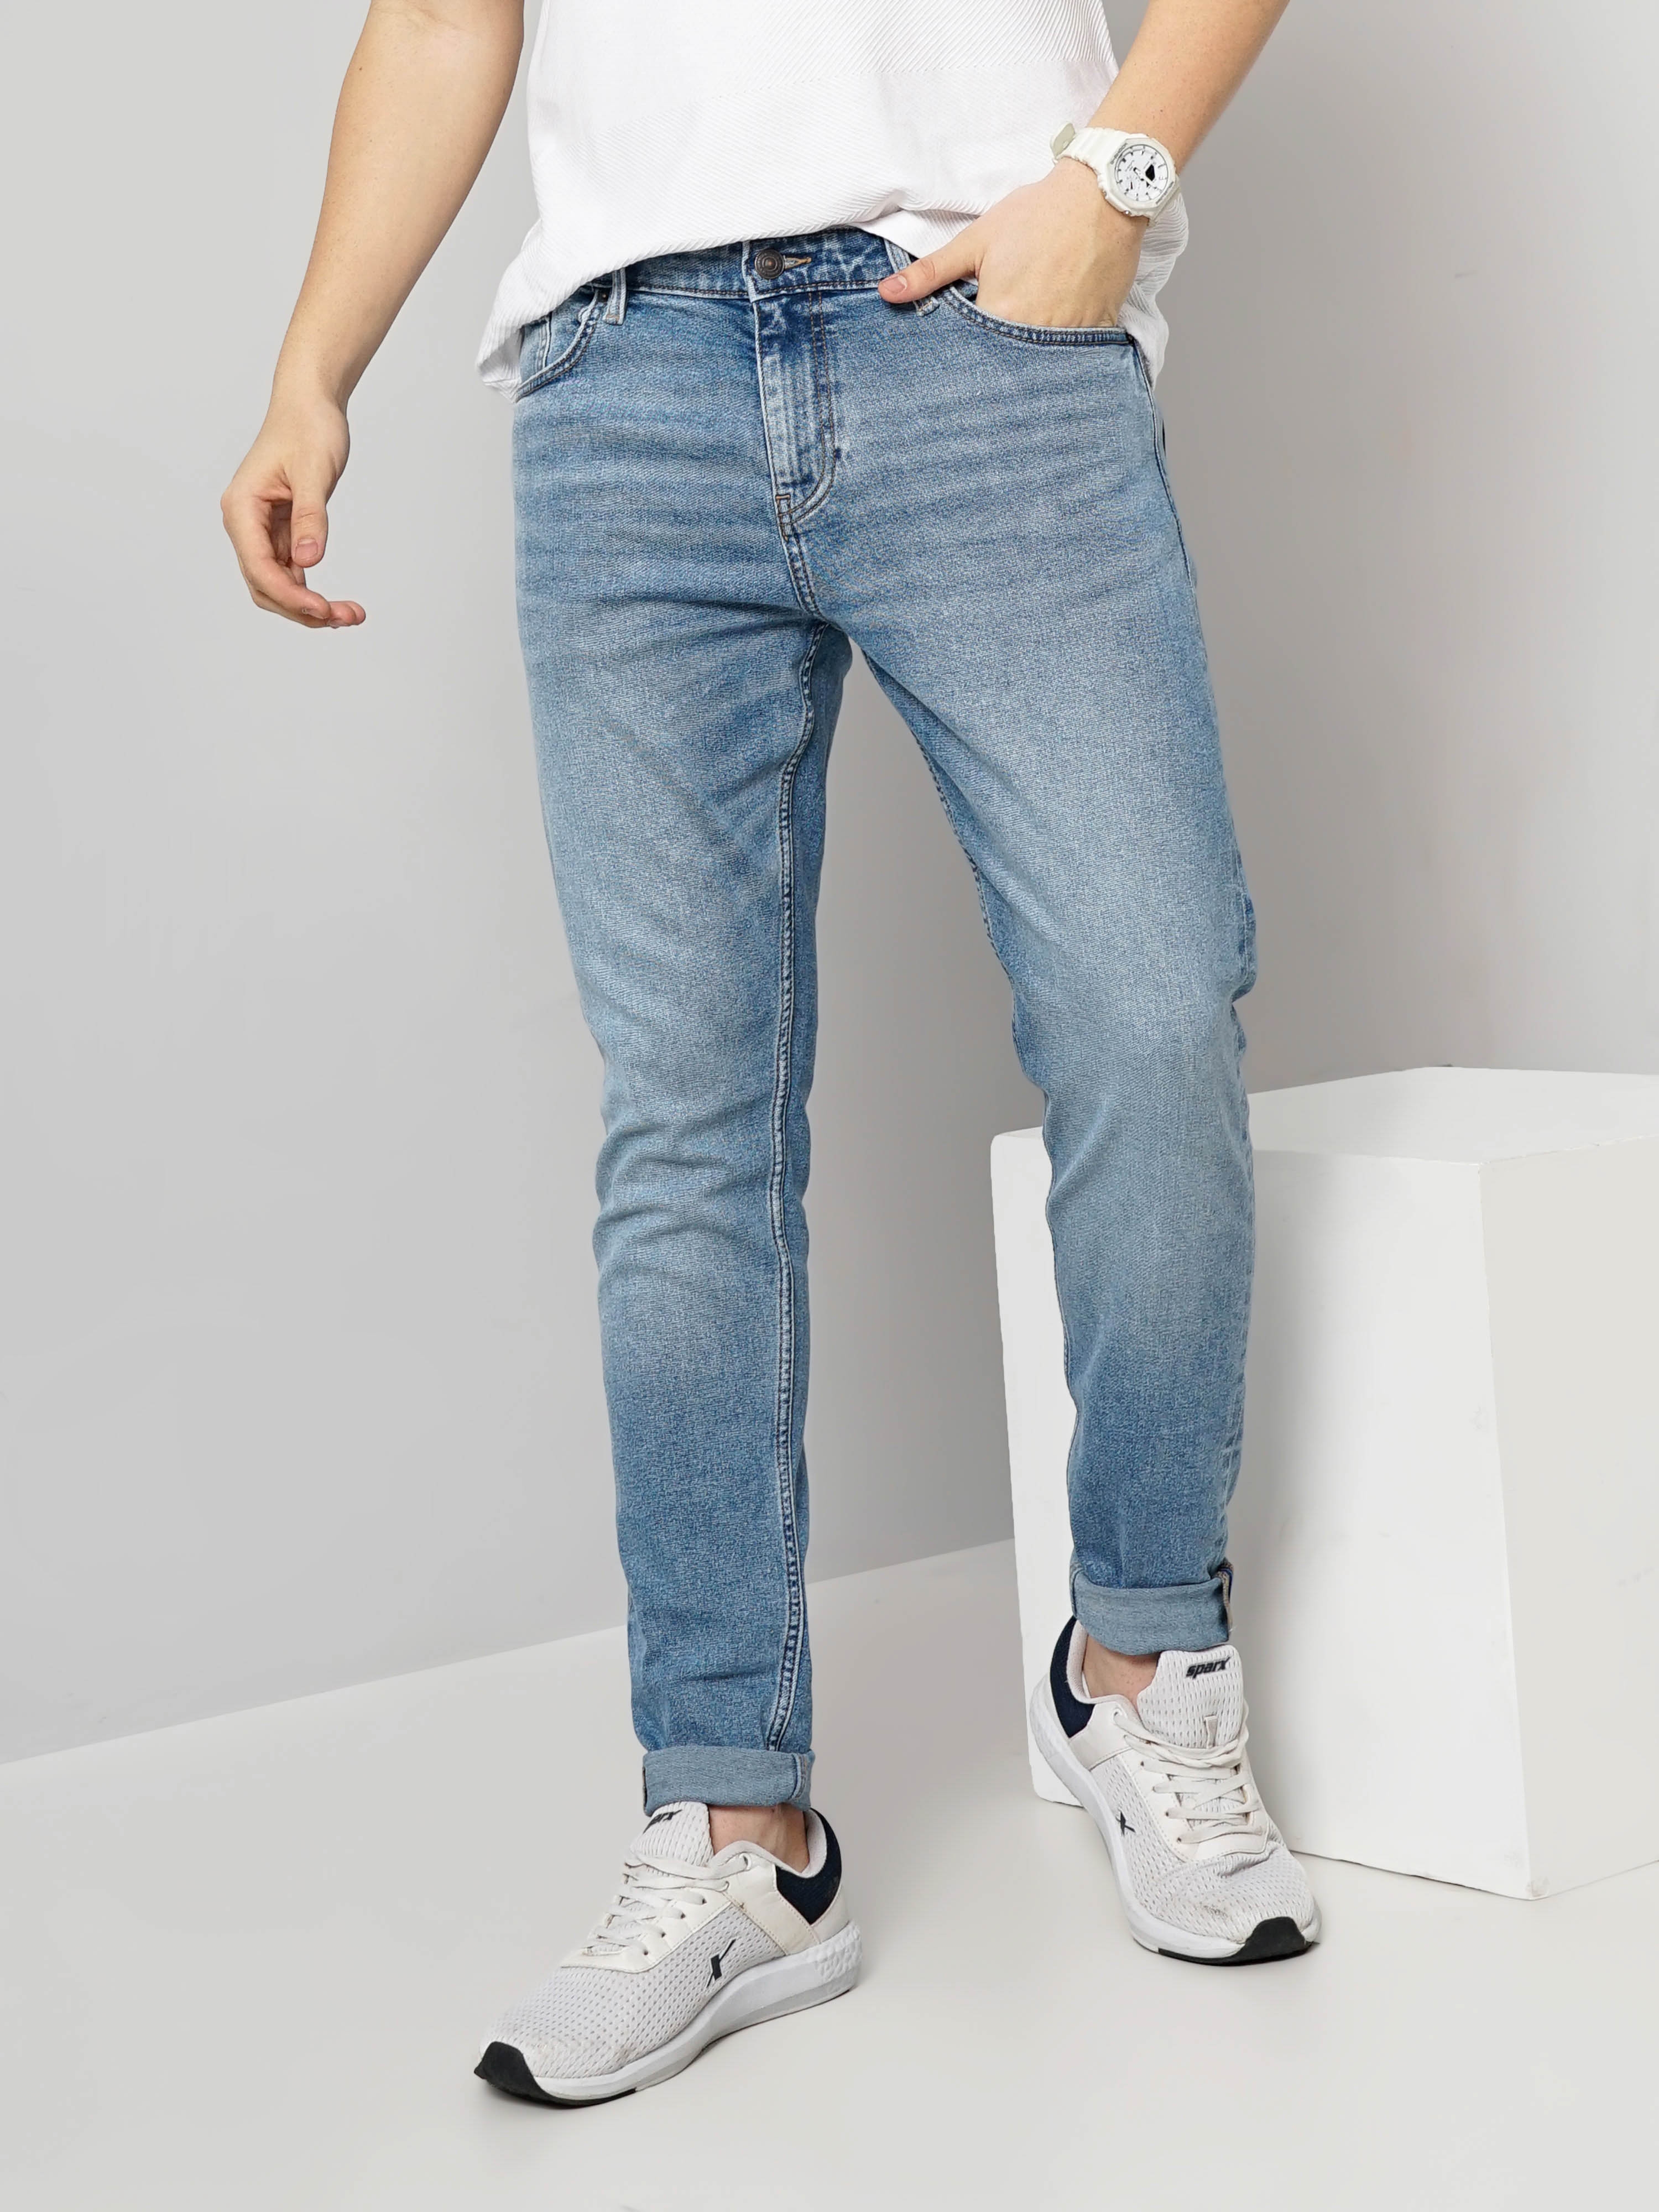 Cotton On Jeans - Buy Cotton On Jeans online in India